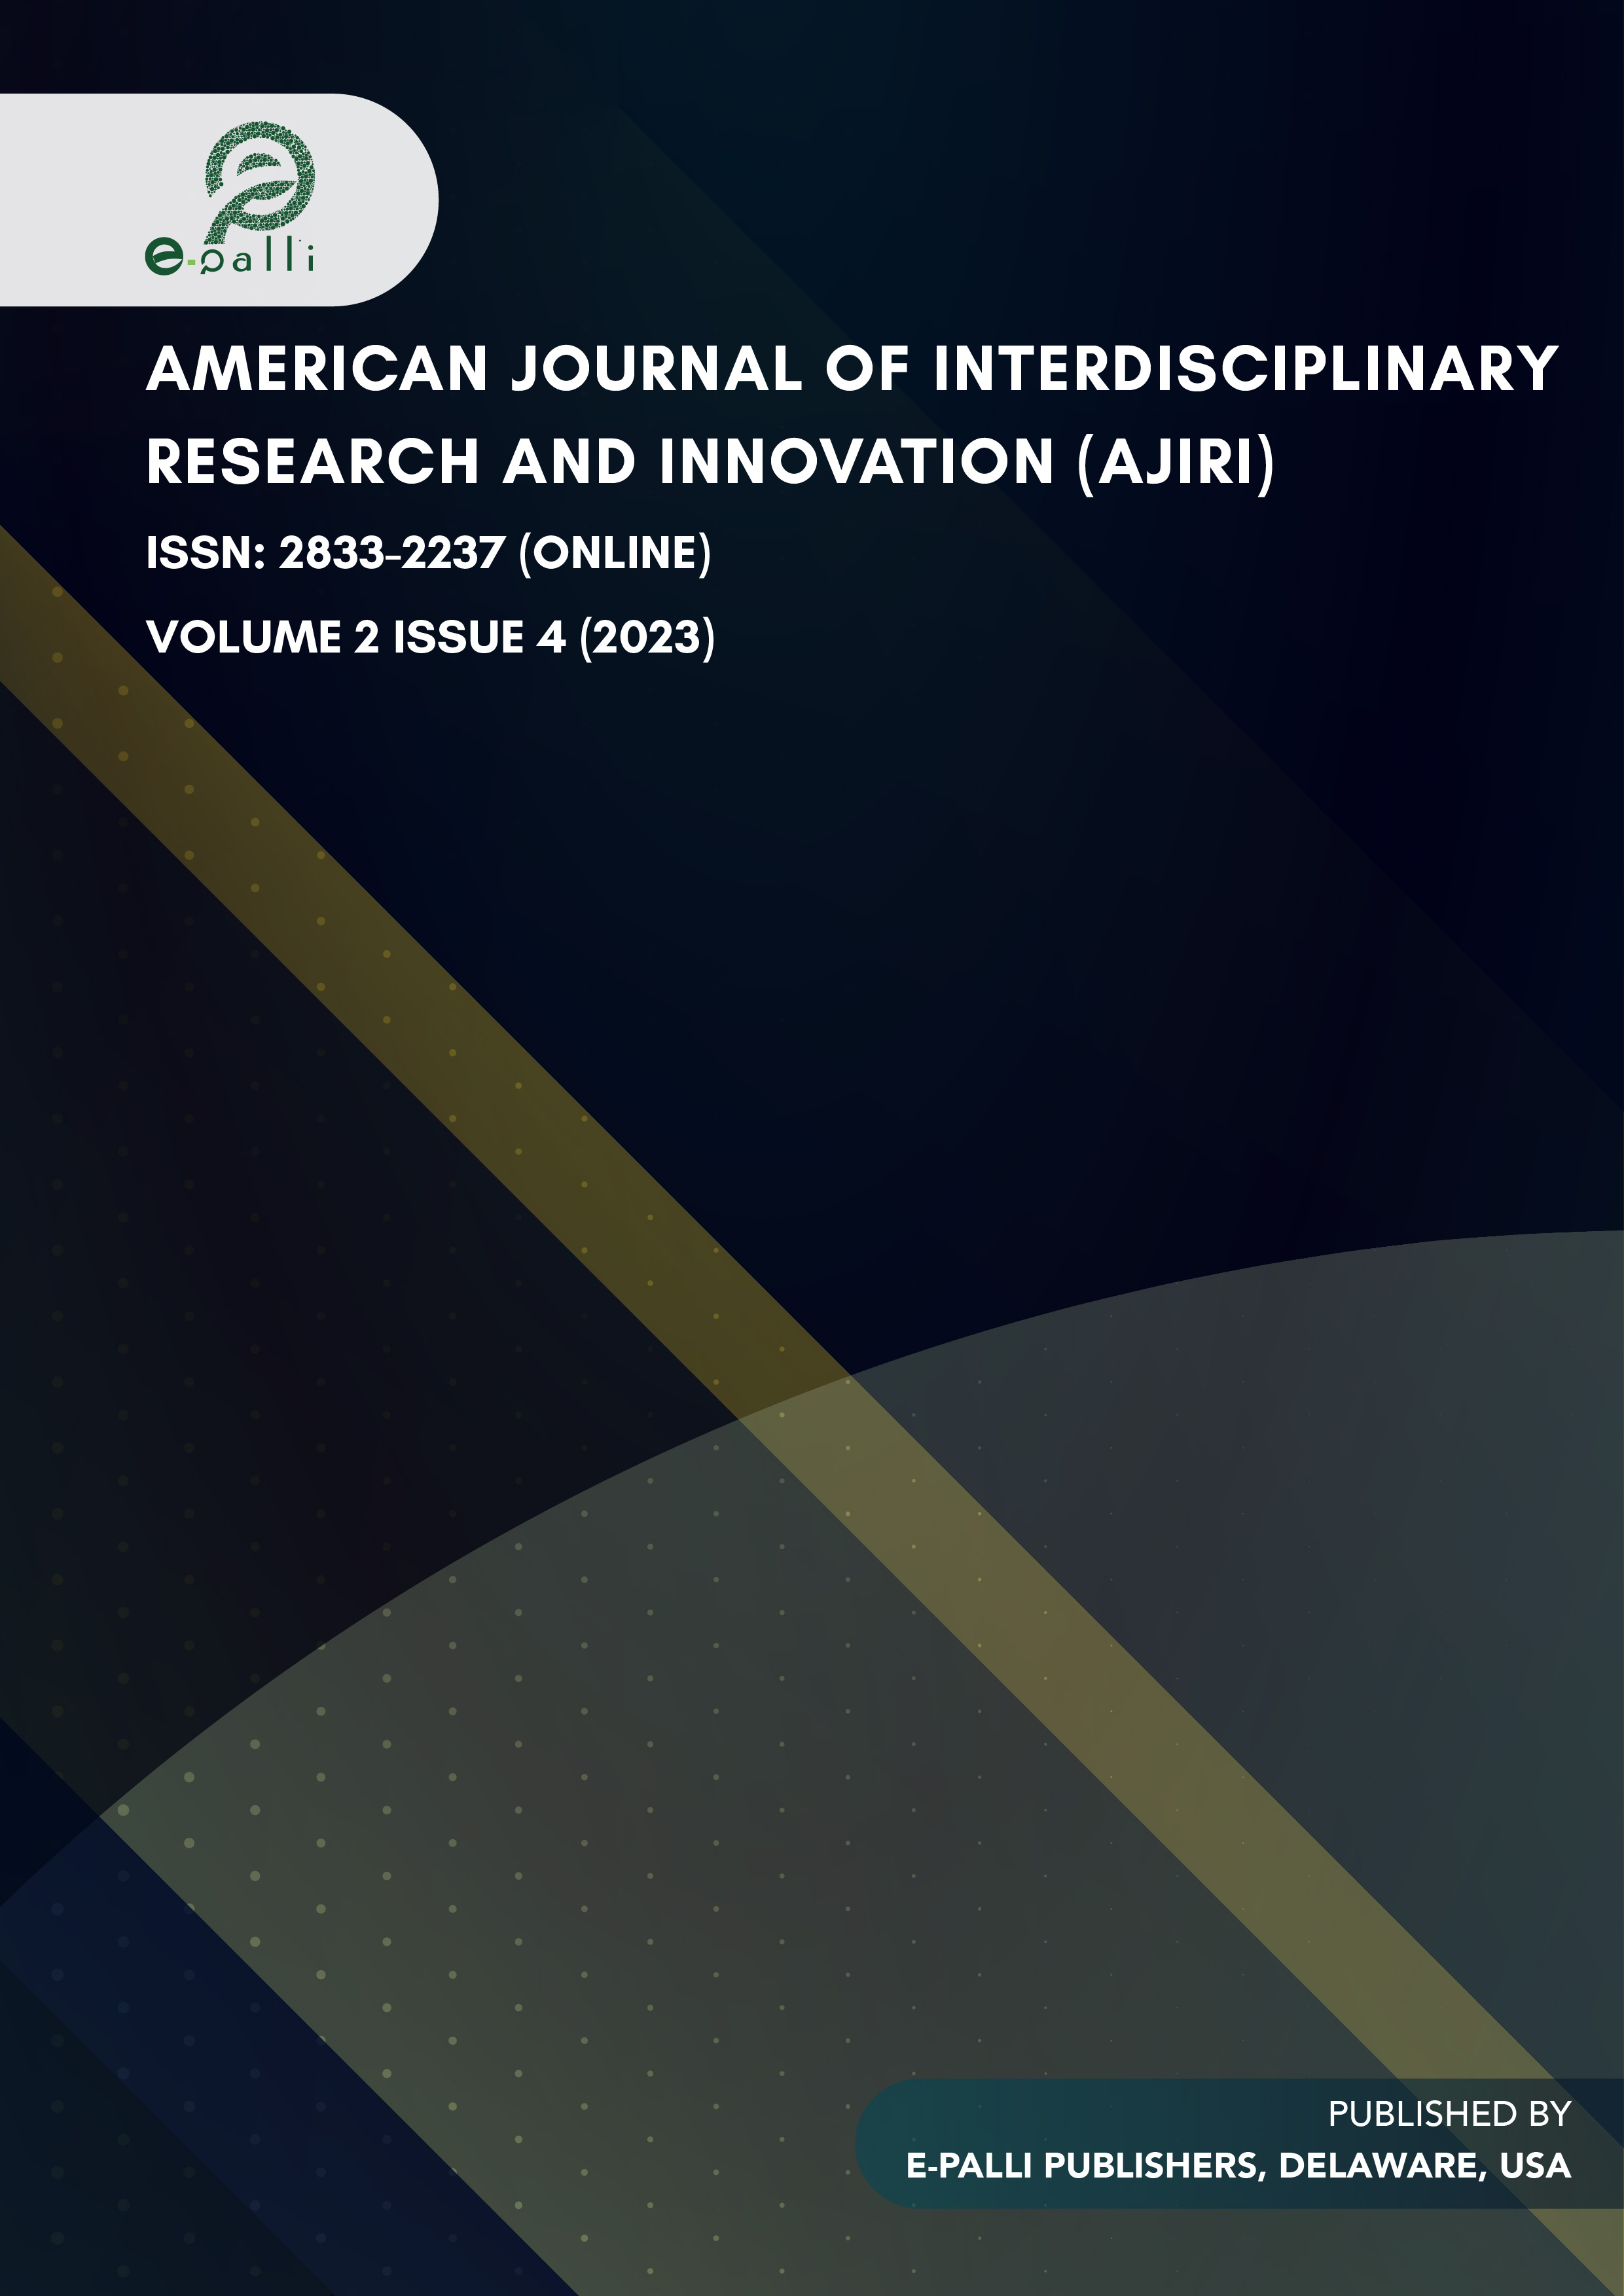 					View Vol. 2 No. 4 (2023): American Journal of Interdisciplinary Research and Innovation
				